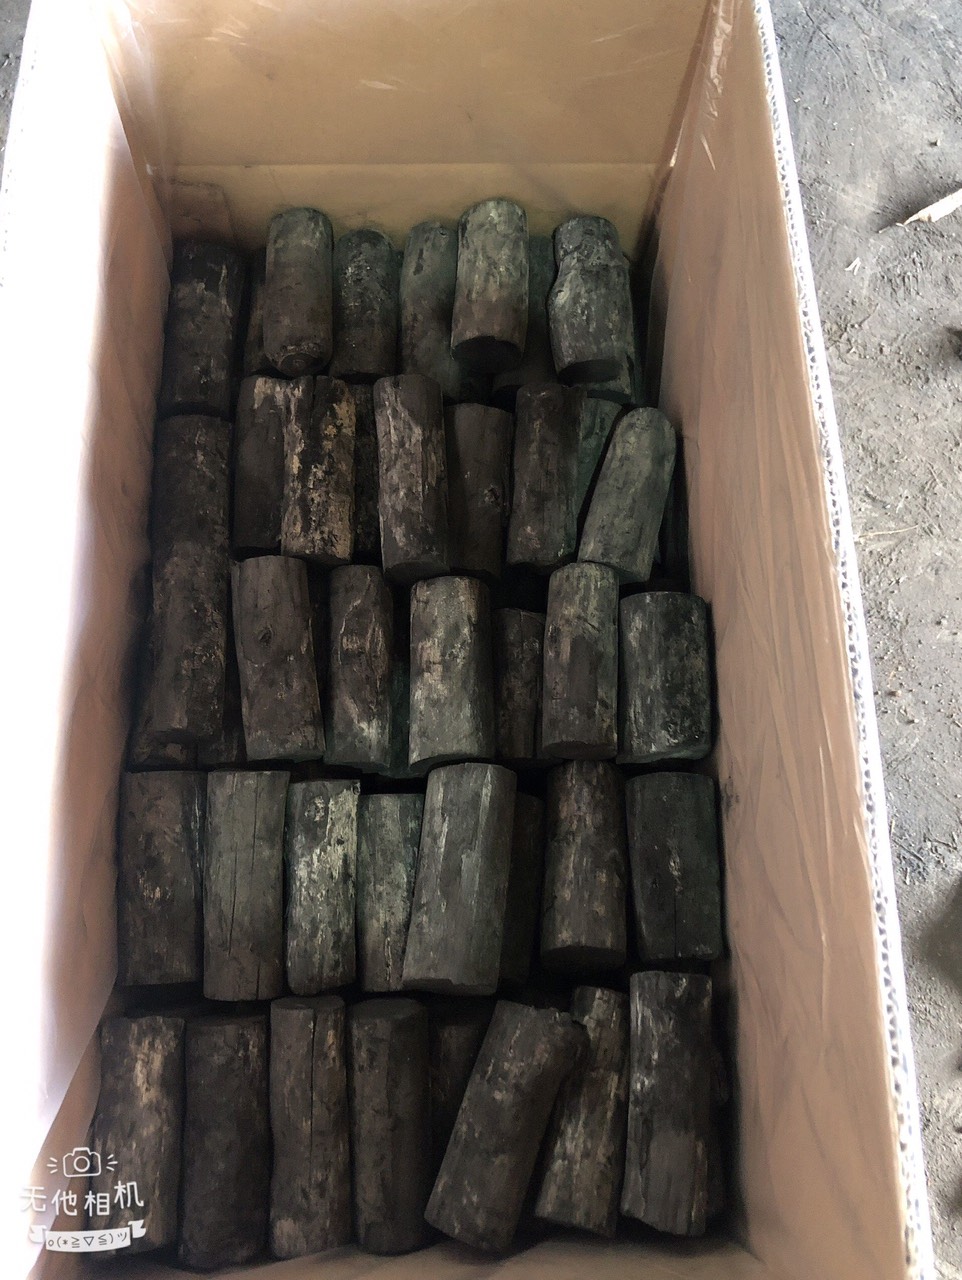 Black Charcoal Briquette High Specification Fast Burning Using For Many Industries Carb Fsc Coc Customized Packing 1